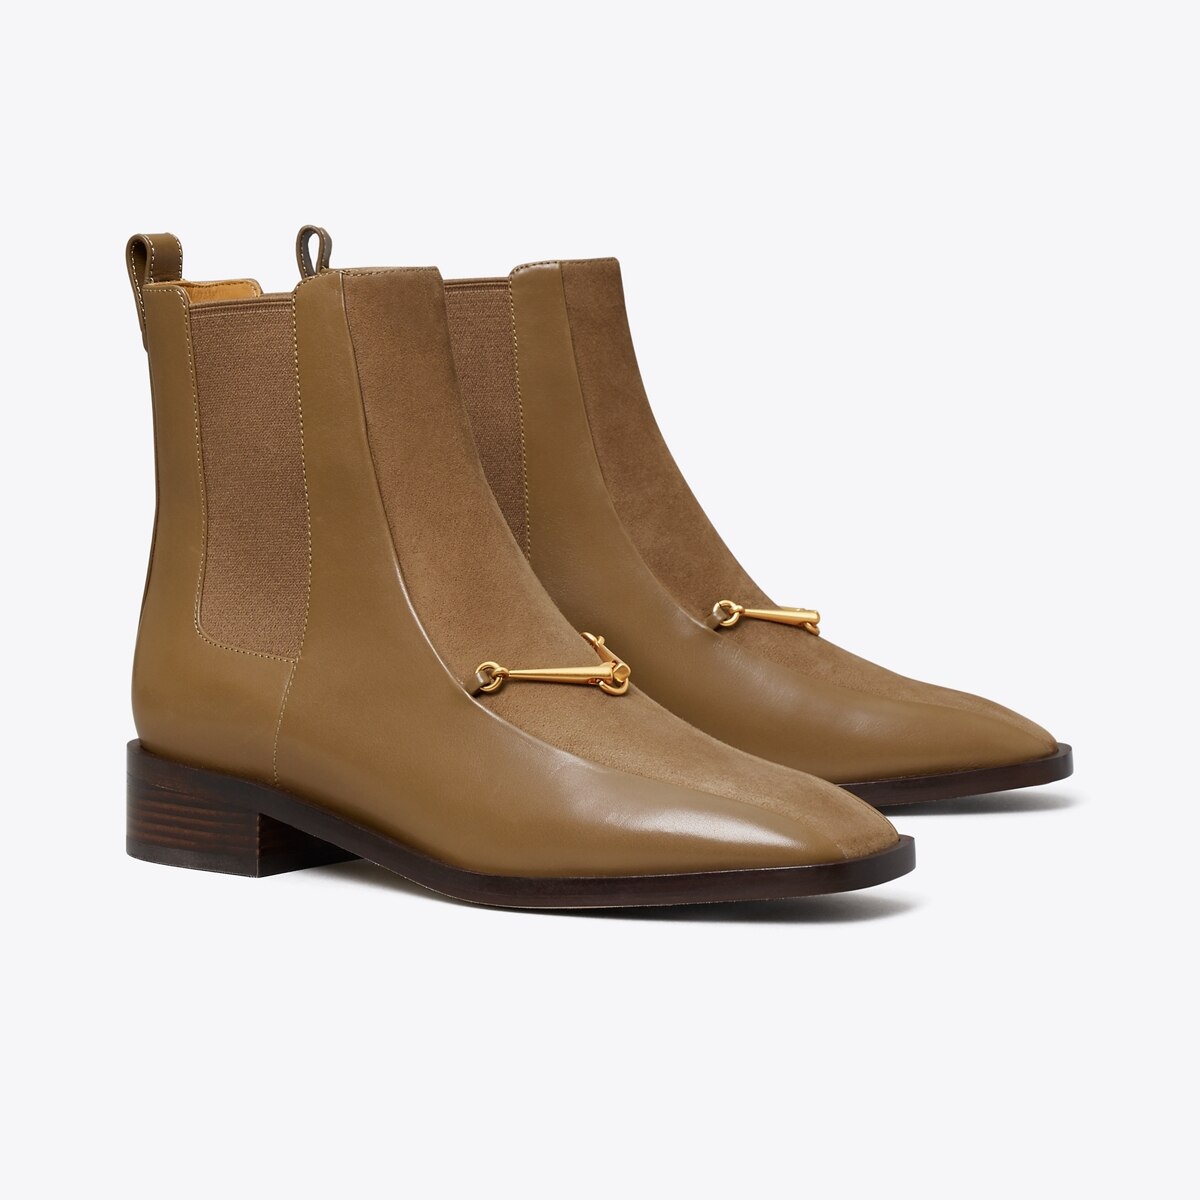 Equestrian Link Chelsea Boot: Women's Designer Ankle Boots | Tory Burch